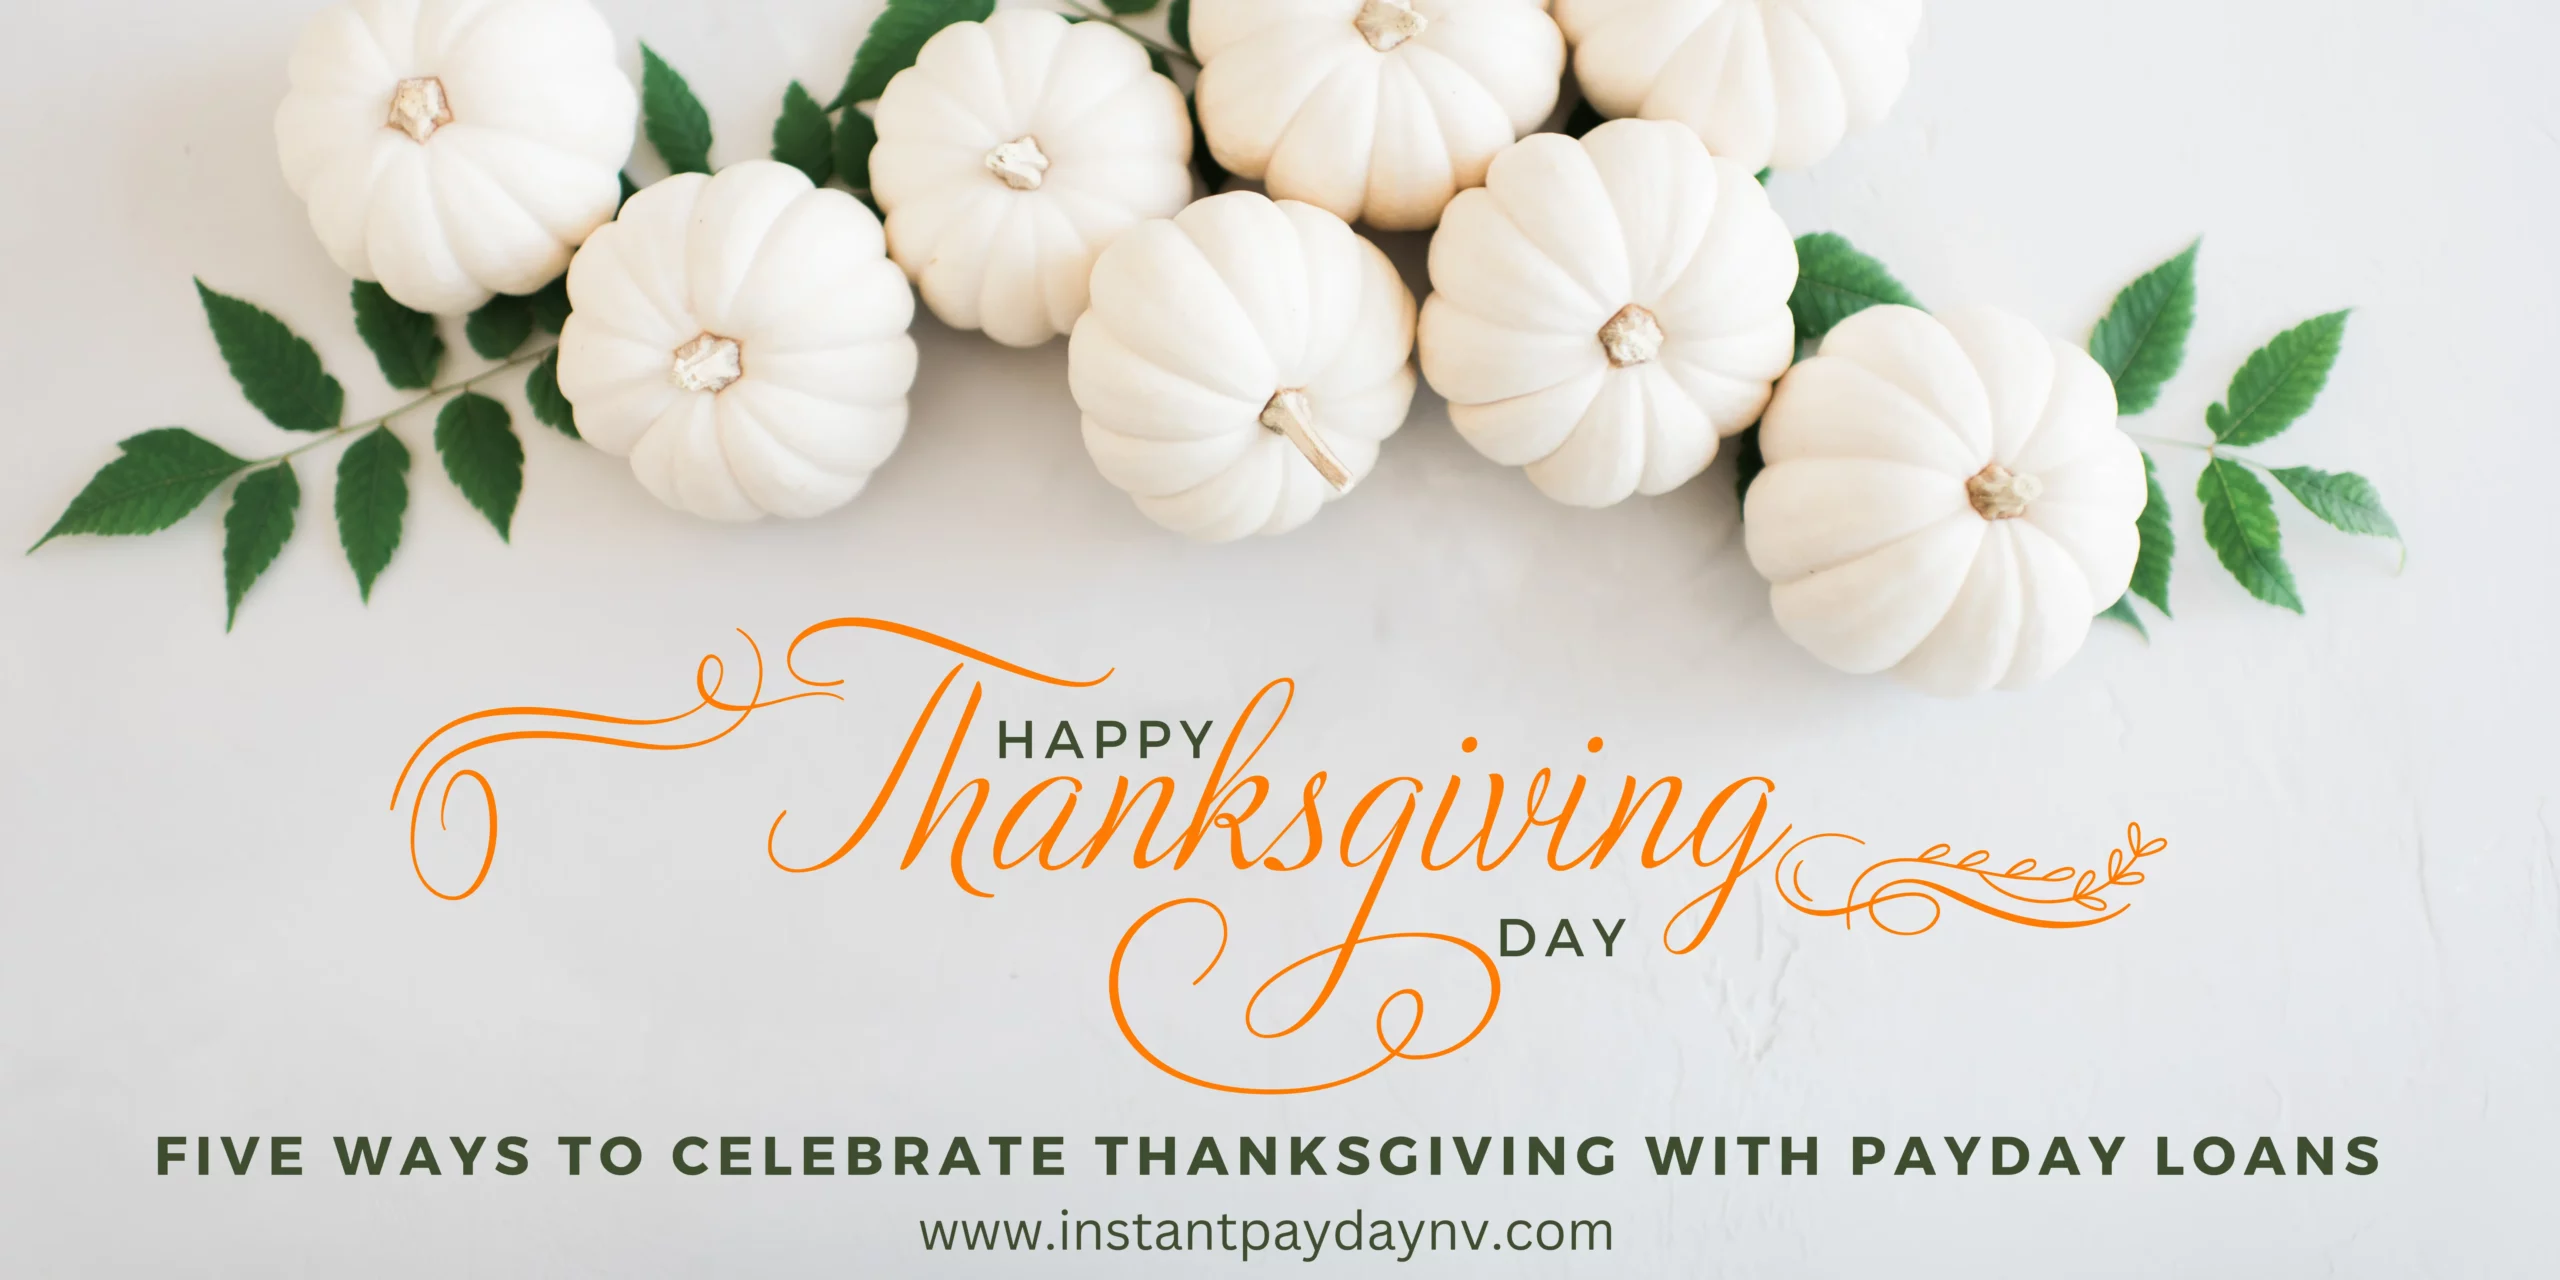 Five Ways to Celebrate Thanksgiving With Payday Loans